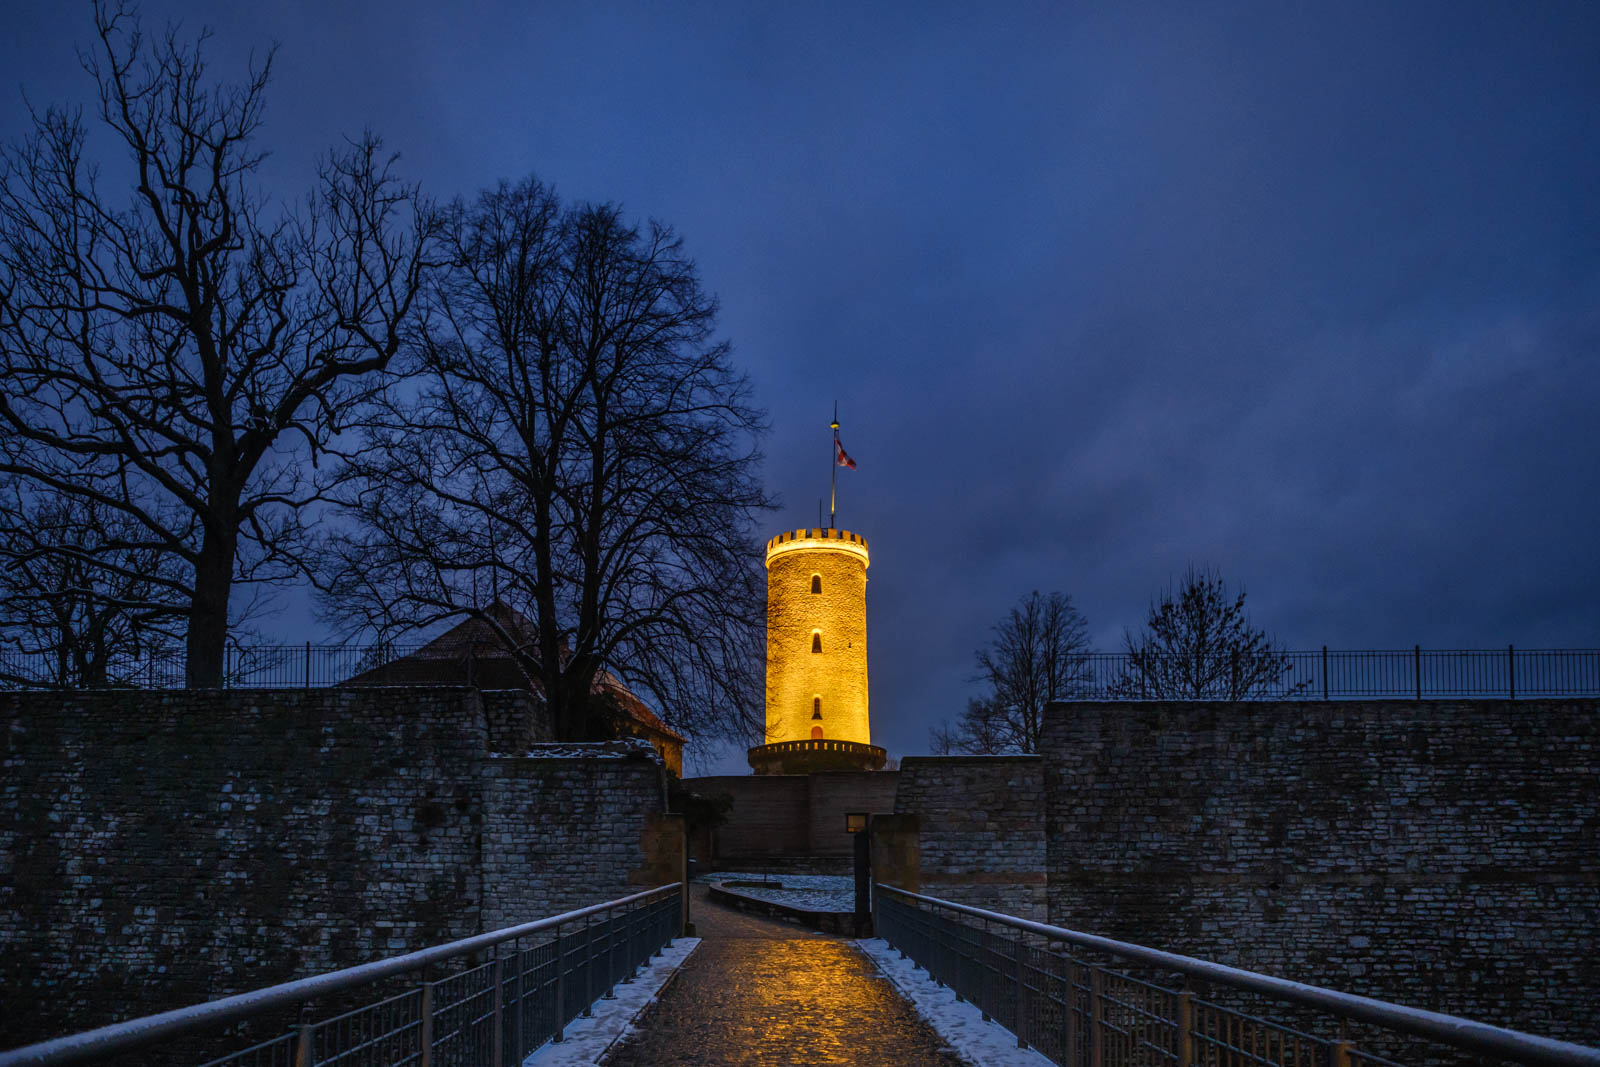 Early winter morning at the 'Sparrenburg' on January 9, 2021 (Bielefeld, Germany).